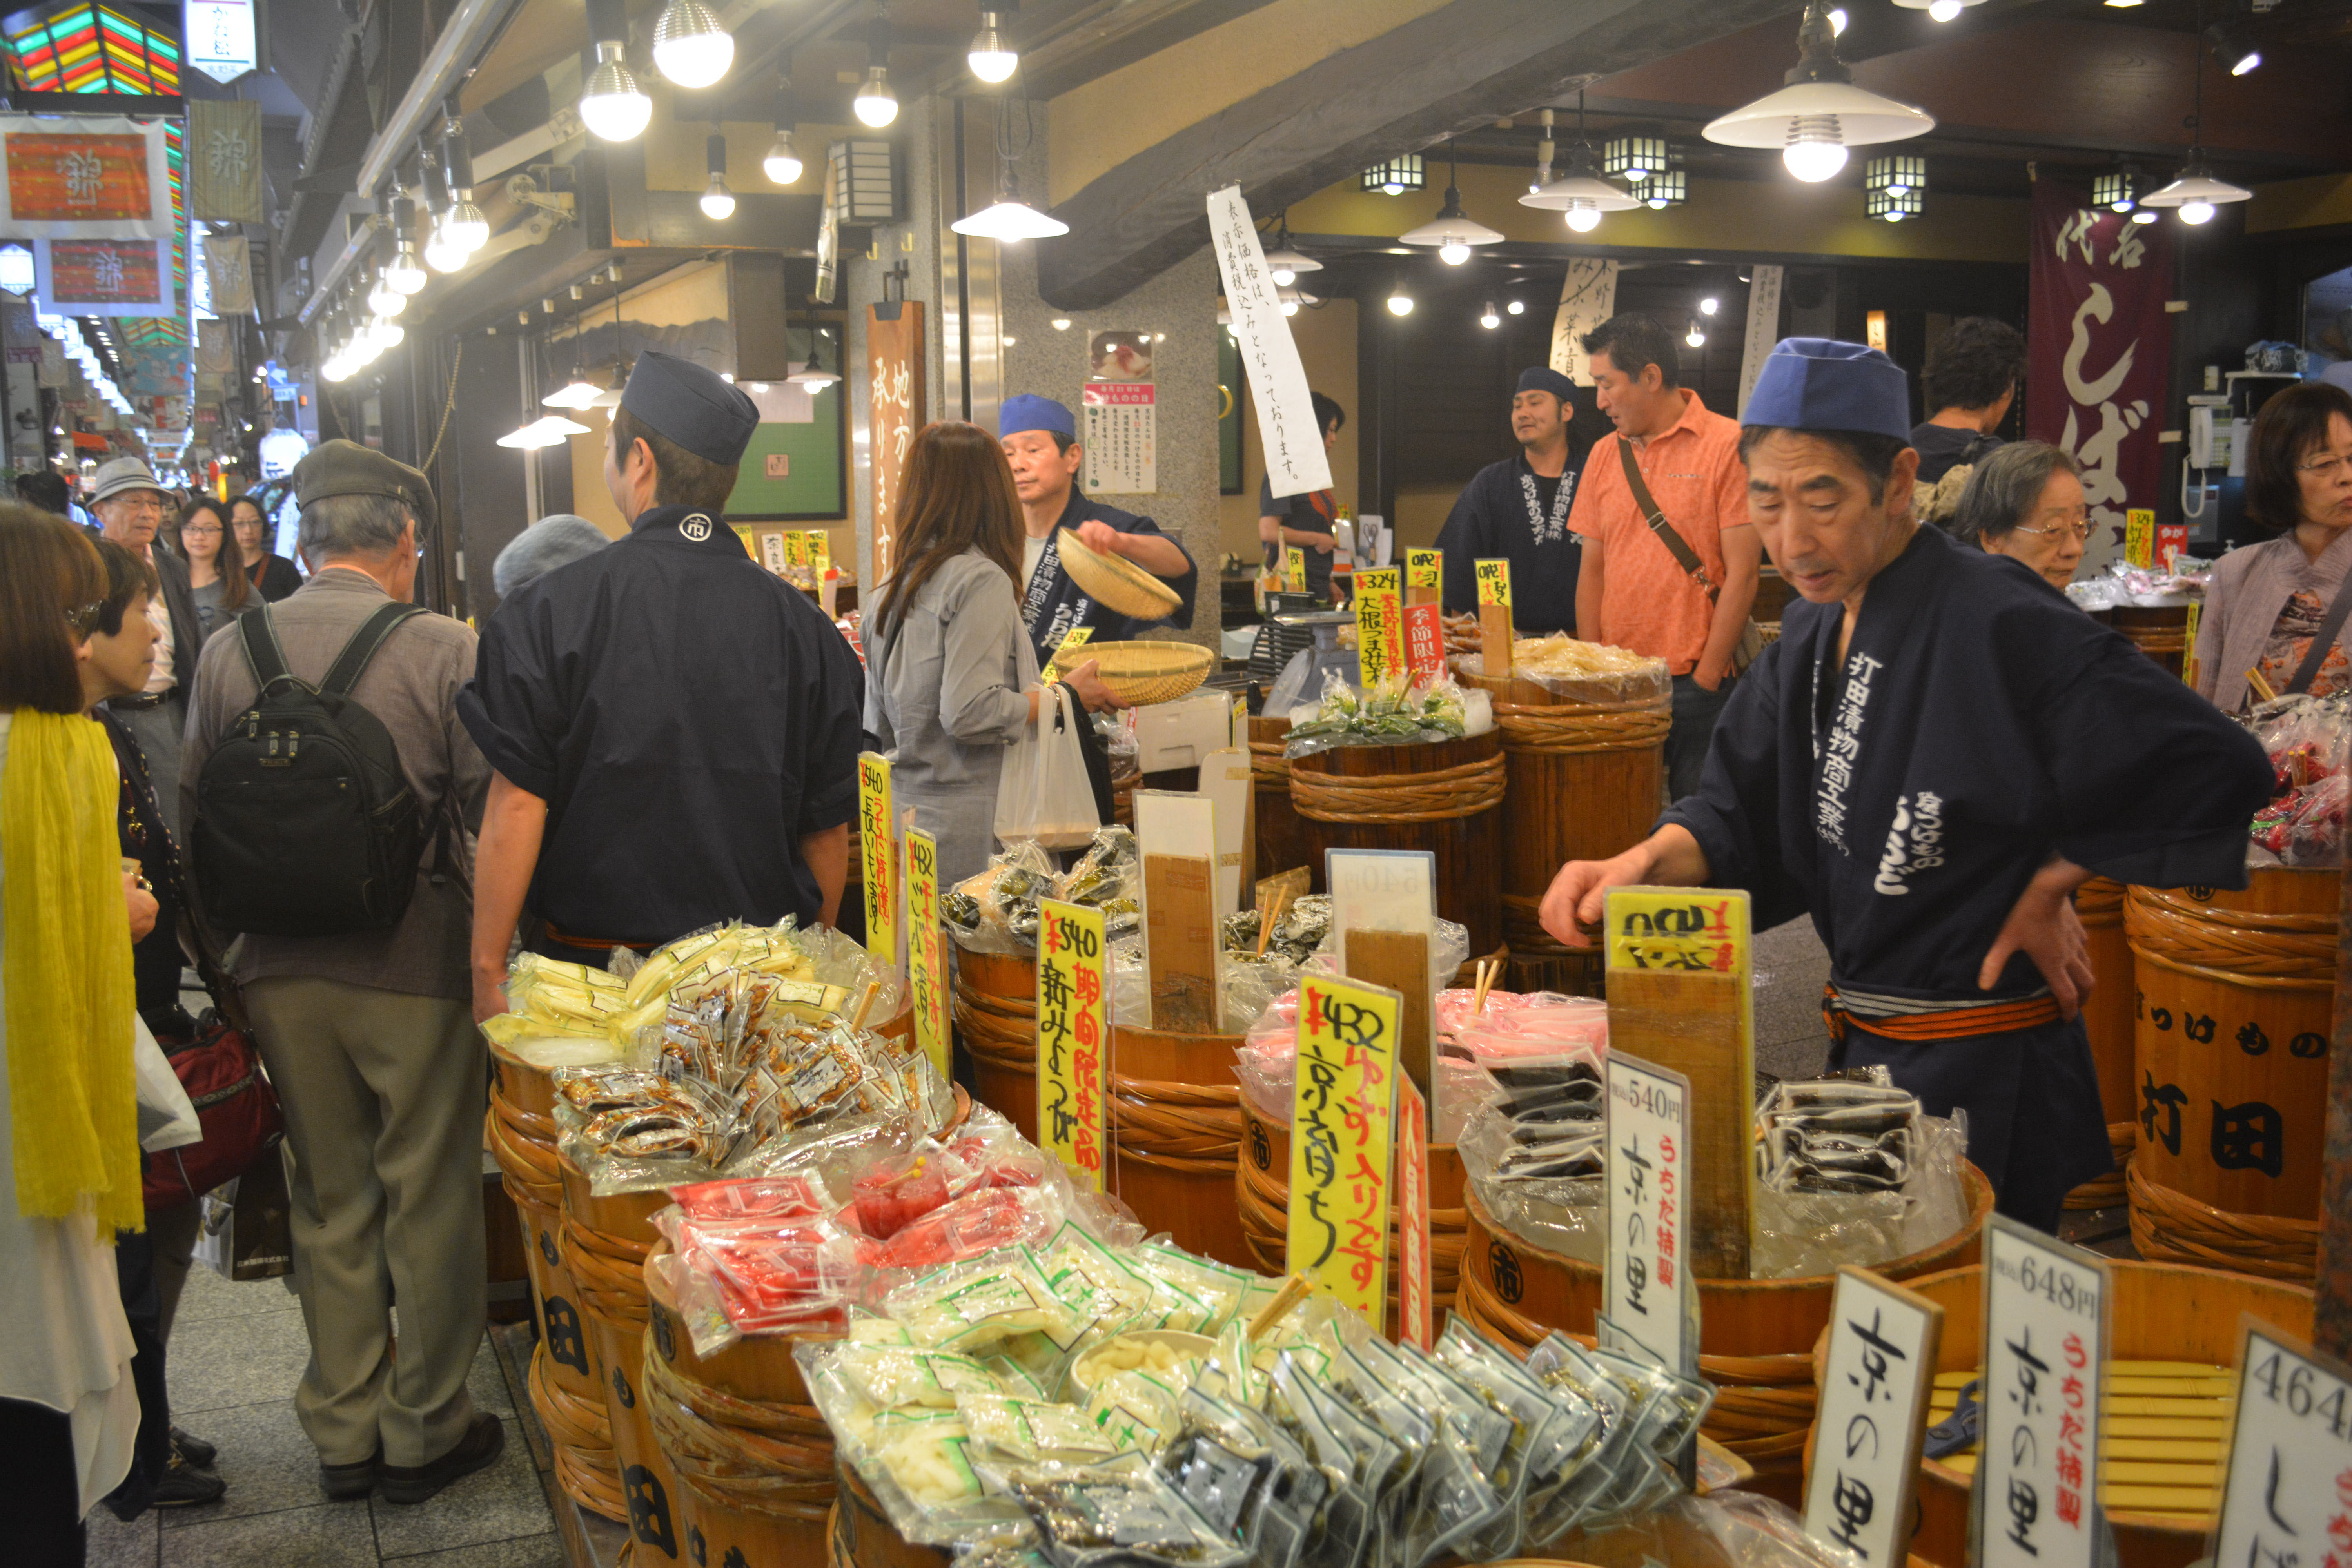 Gourmet grail: The covered Nishiki Market has been in operation for centuries and offers artisanal produce for foodies of all stripes. | J.J. O'DONOGHUE